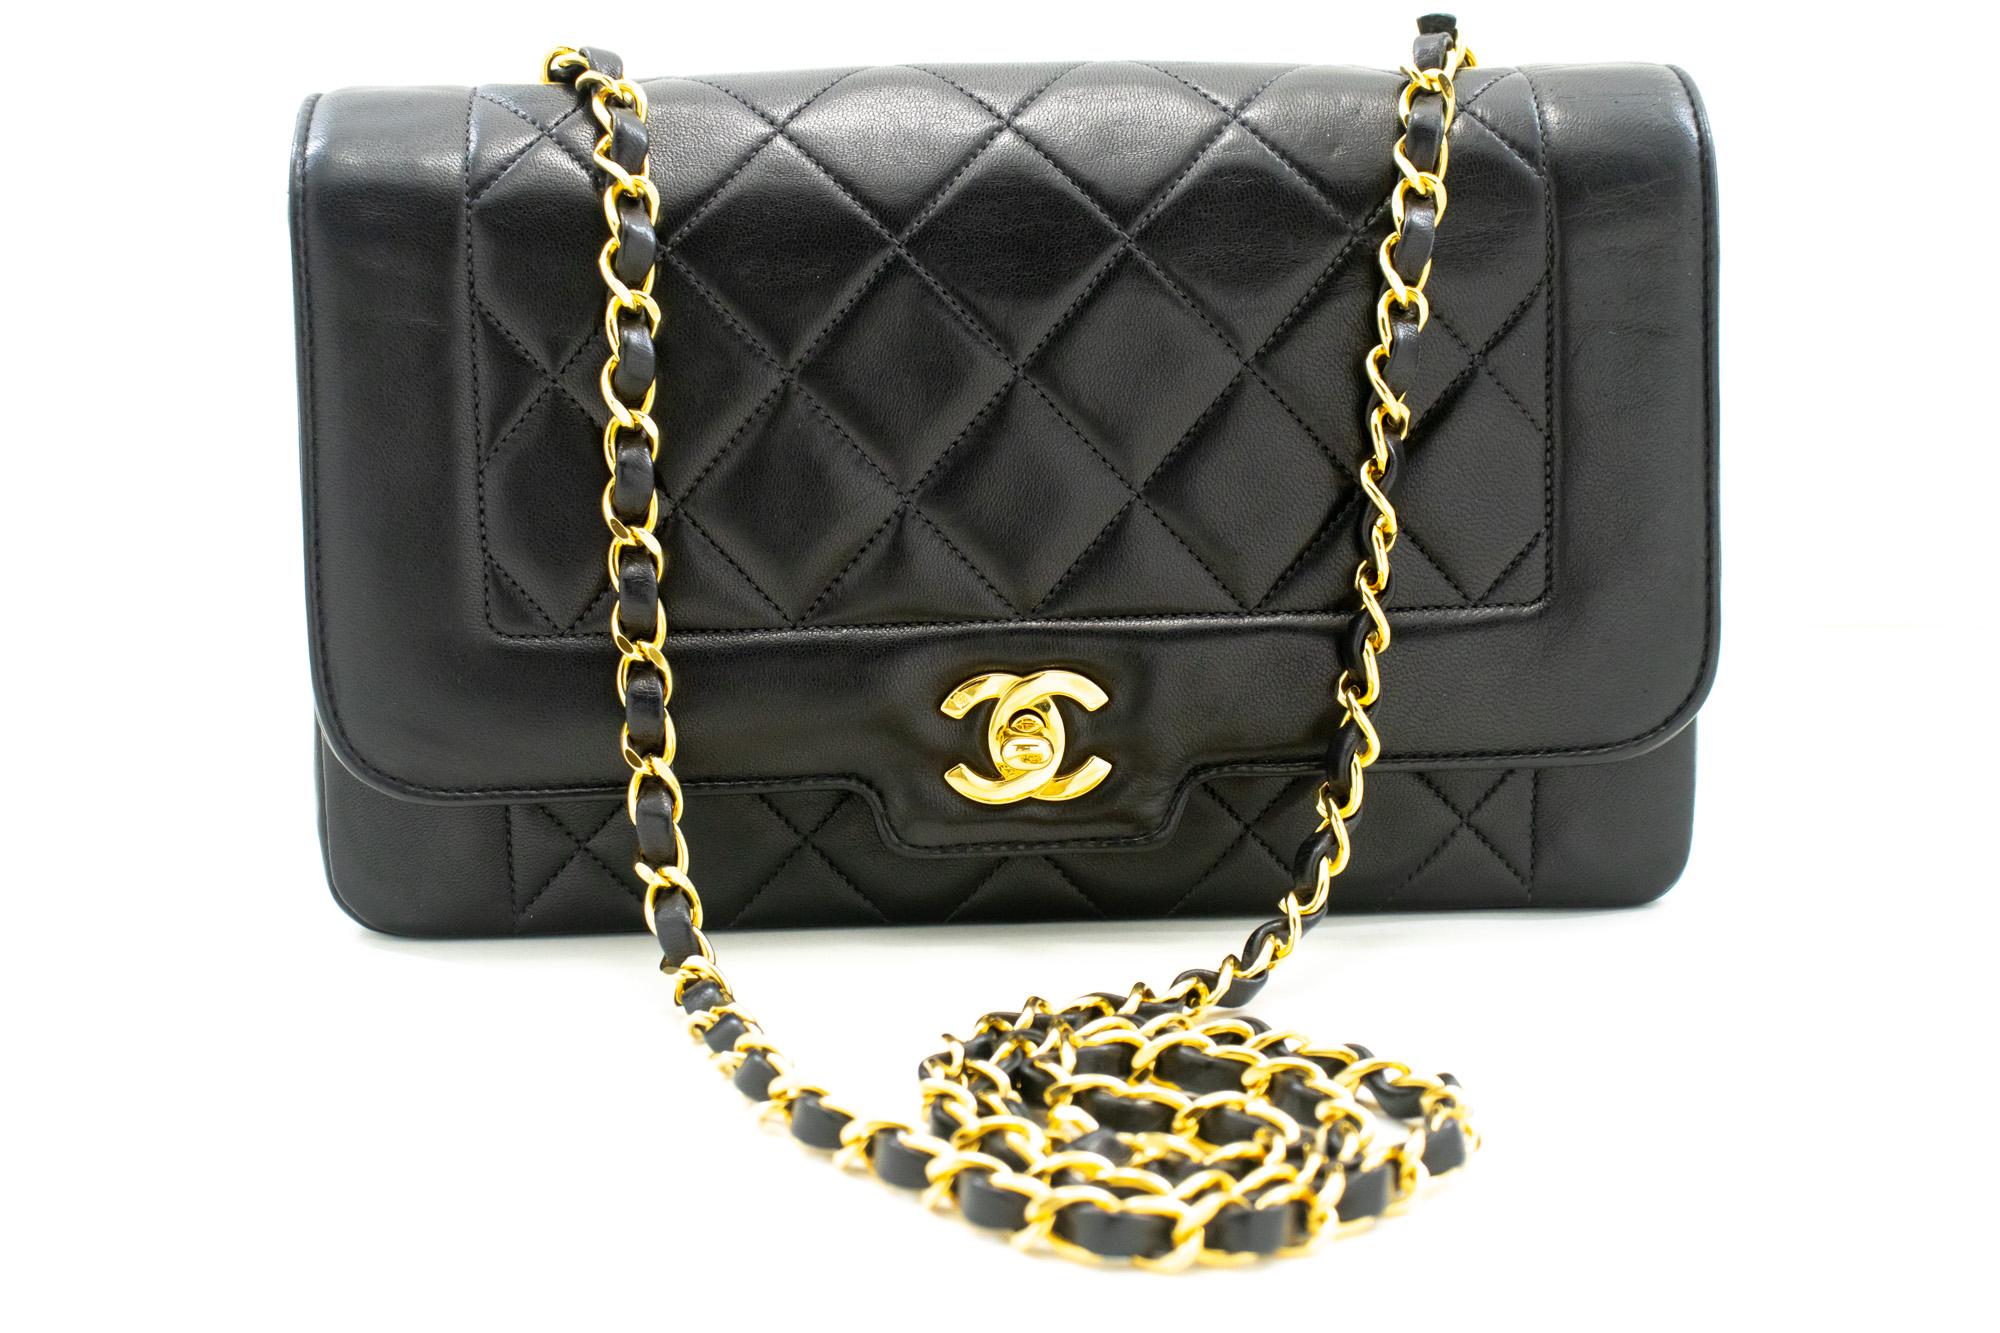 An authentic CHANEL Vintage Chain Shoulder Bag Single Flap Quilted made of black Lambskin. The color is Black. The outside material is Leather. The pattern is Solid. This item is Vintage / Classic. The year of manufacture would be